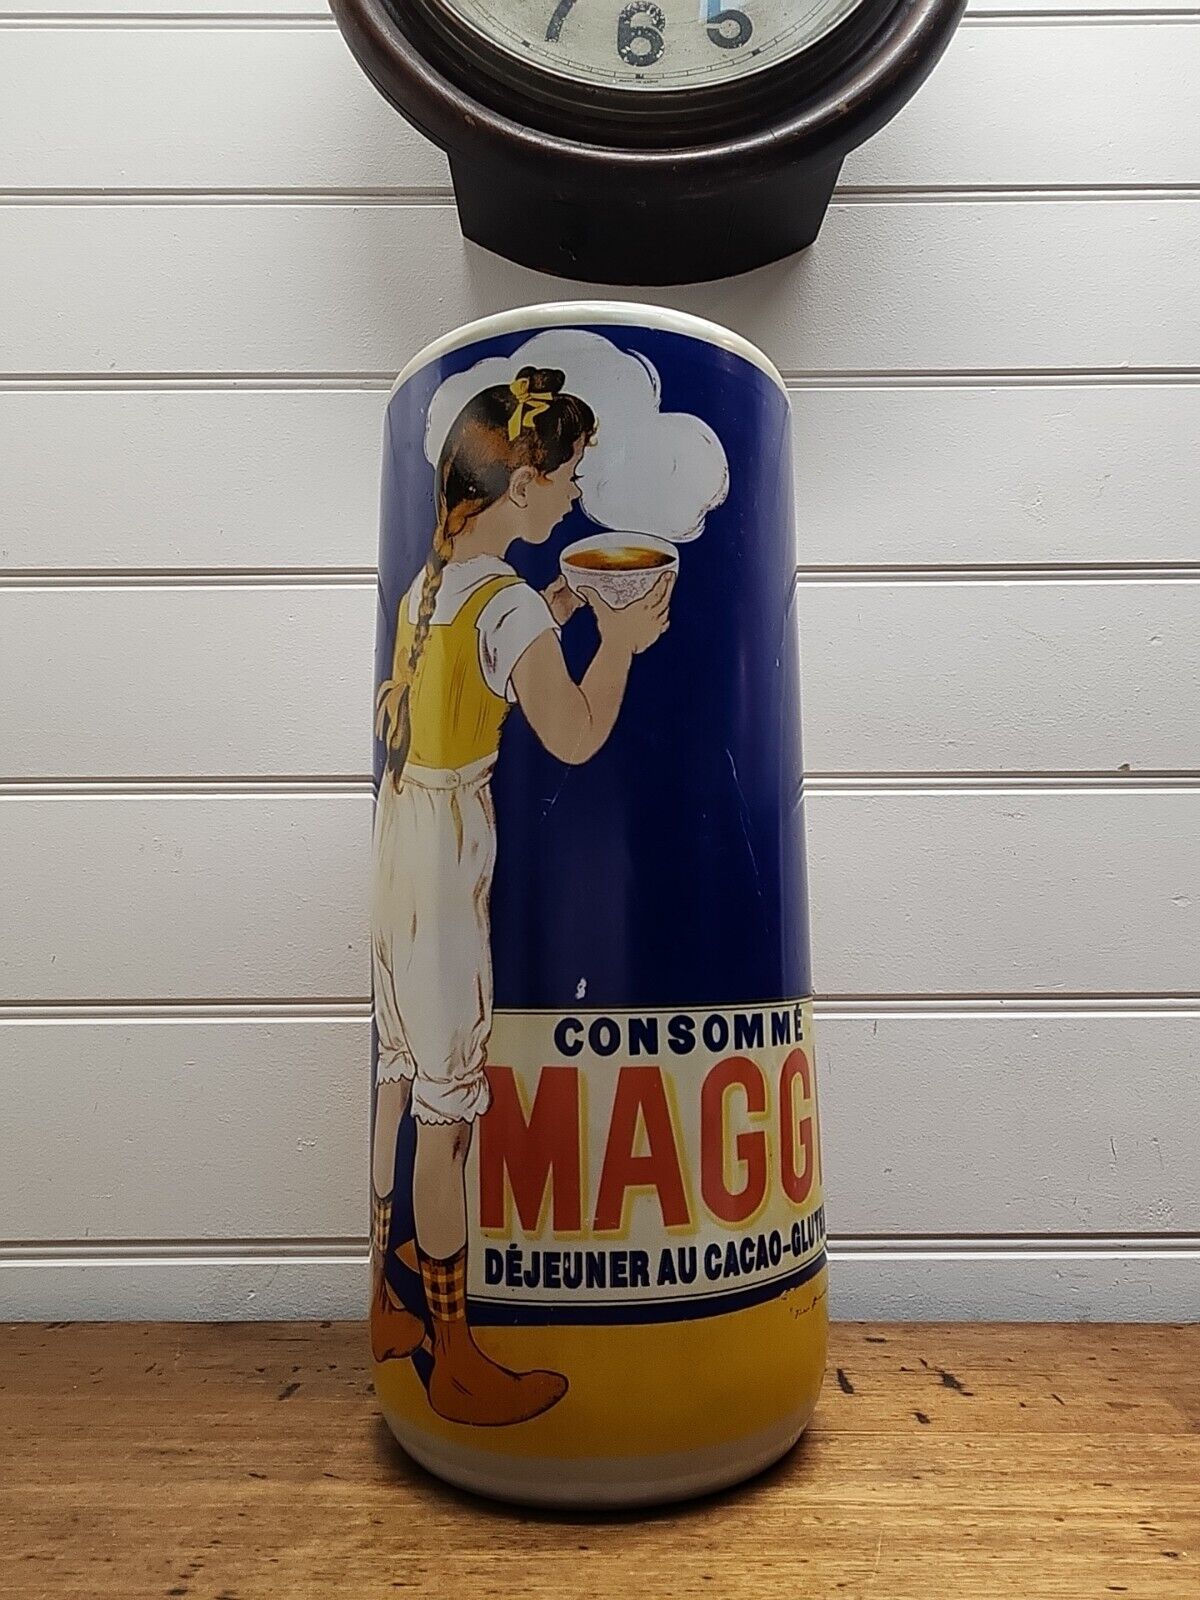  Large french ceramic maggi soup Advertising container shop general store 